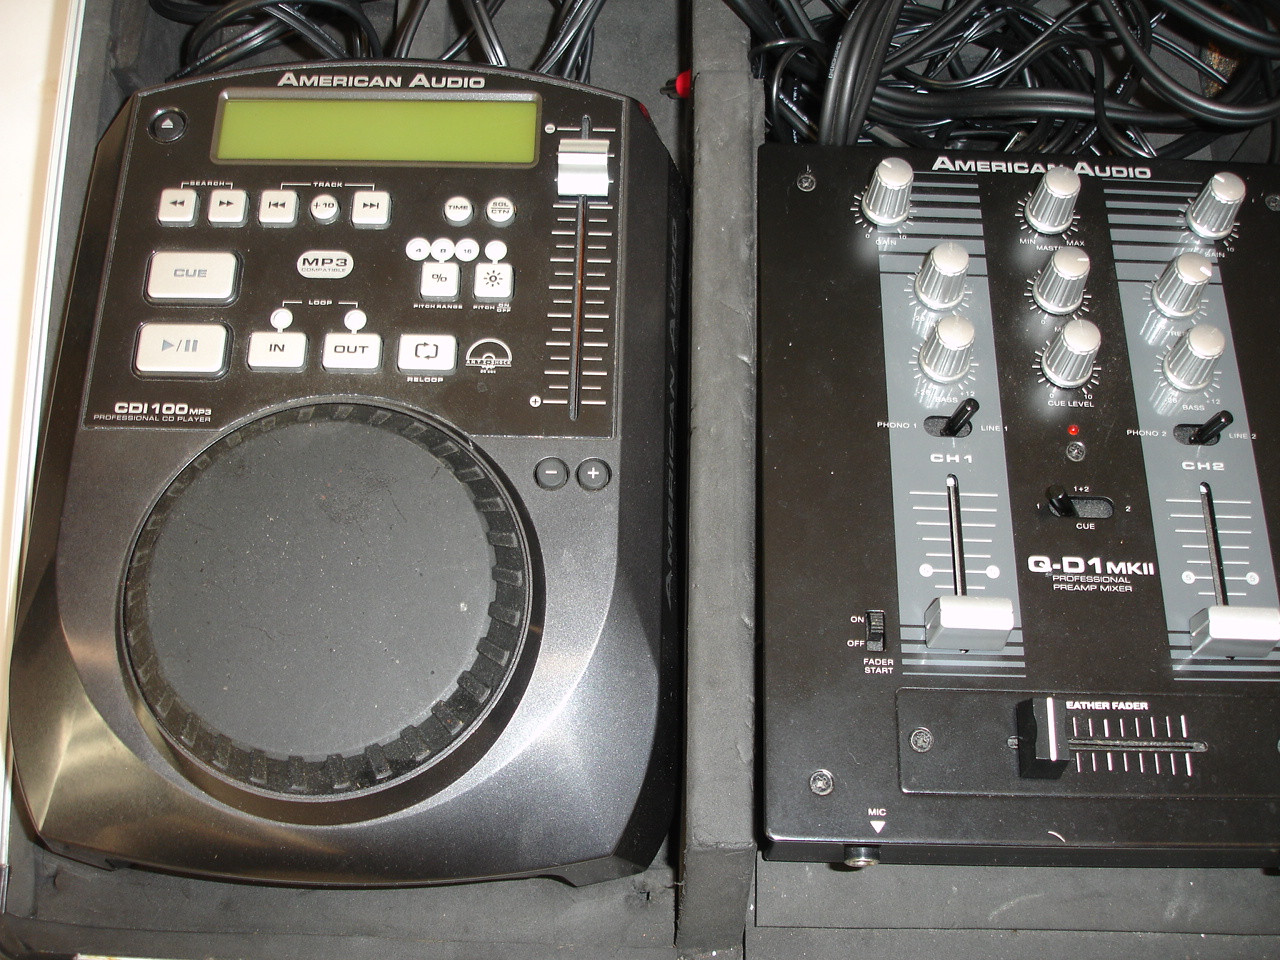 American Audio CDI100 MP3 DJ System w/ 2 Multiple-Format Players u0026  2-channel Q-D1MKII Mixer - Previously Owned - Bill's Music